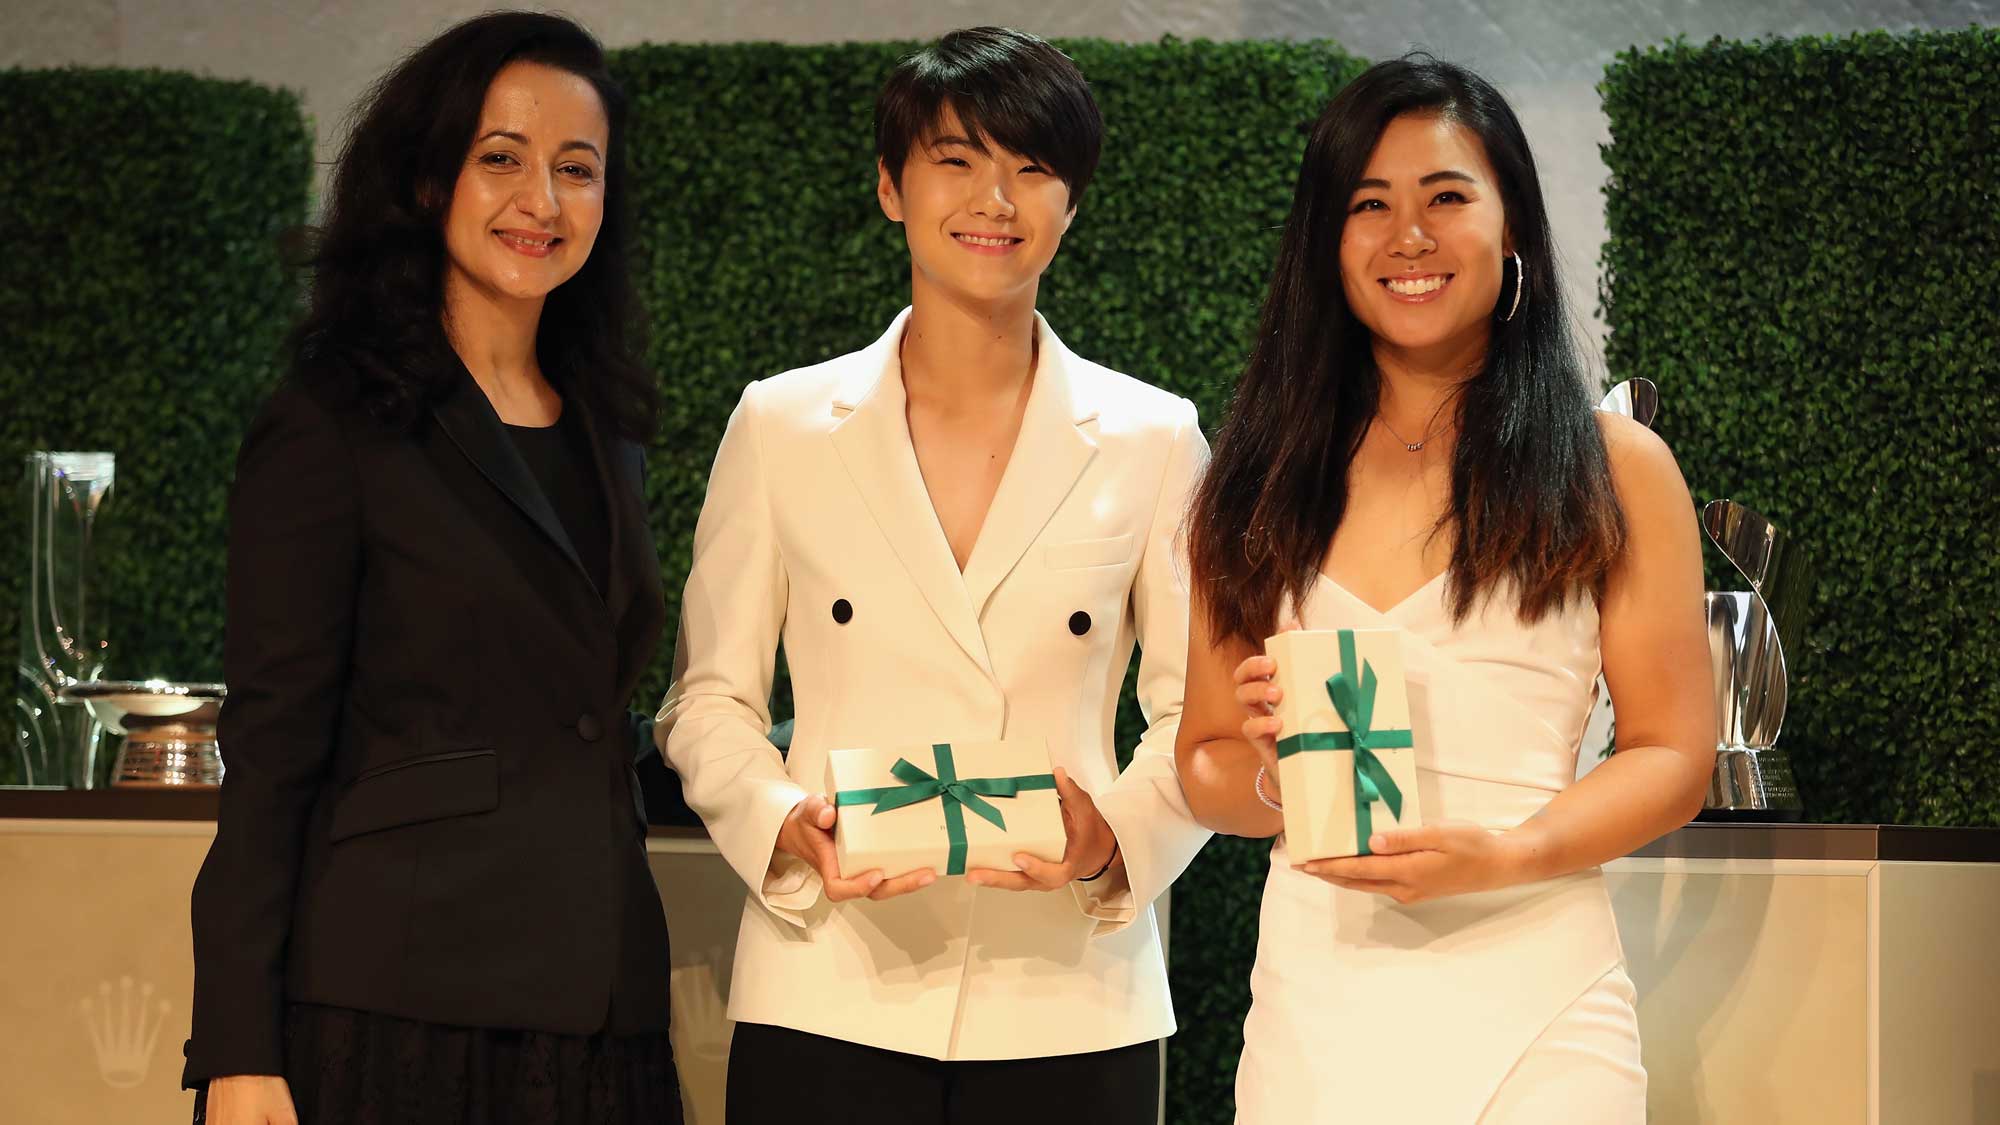 2017 Rolex First-Time Winners Sung Hyun Park of Korea (C) and Danielle Kang of the United States (R) pose during the LPGA Rolex Players Awards at The Ritz-Carlton Golf Resort